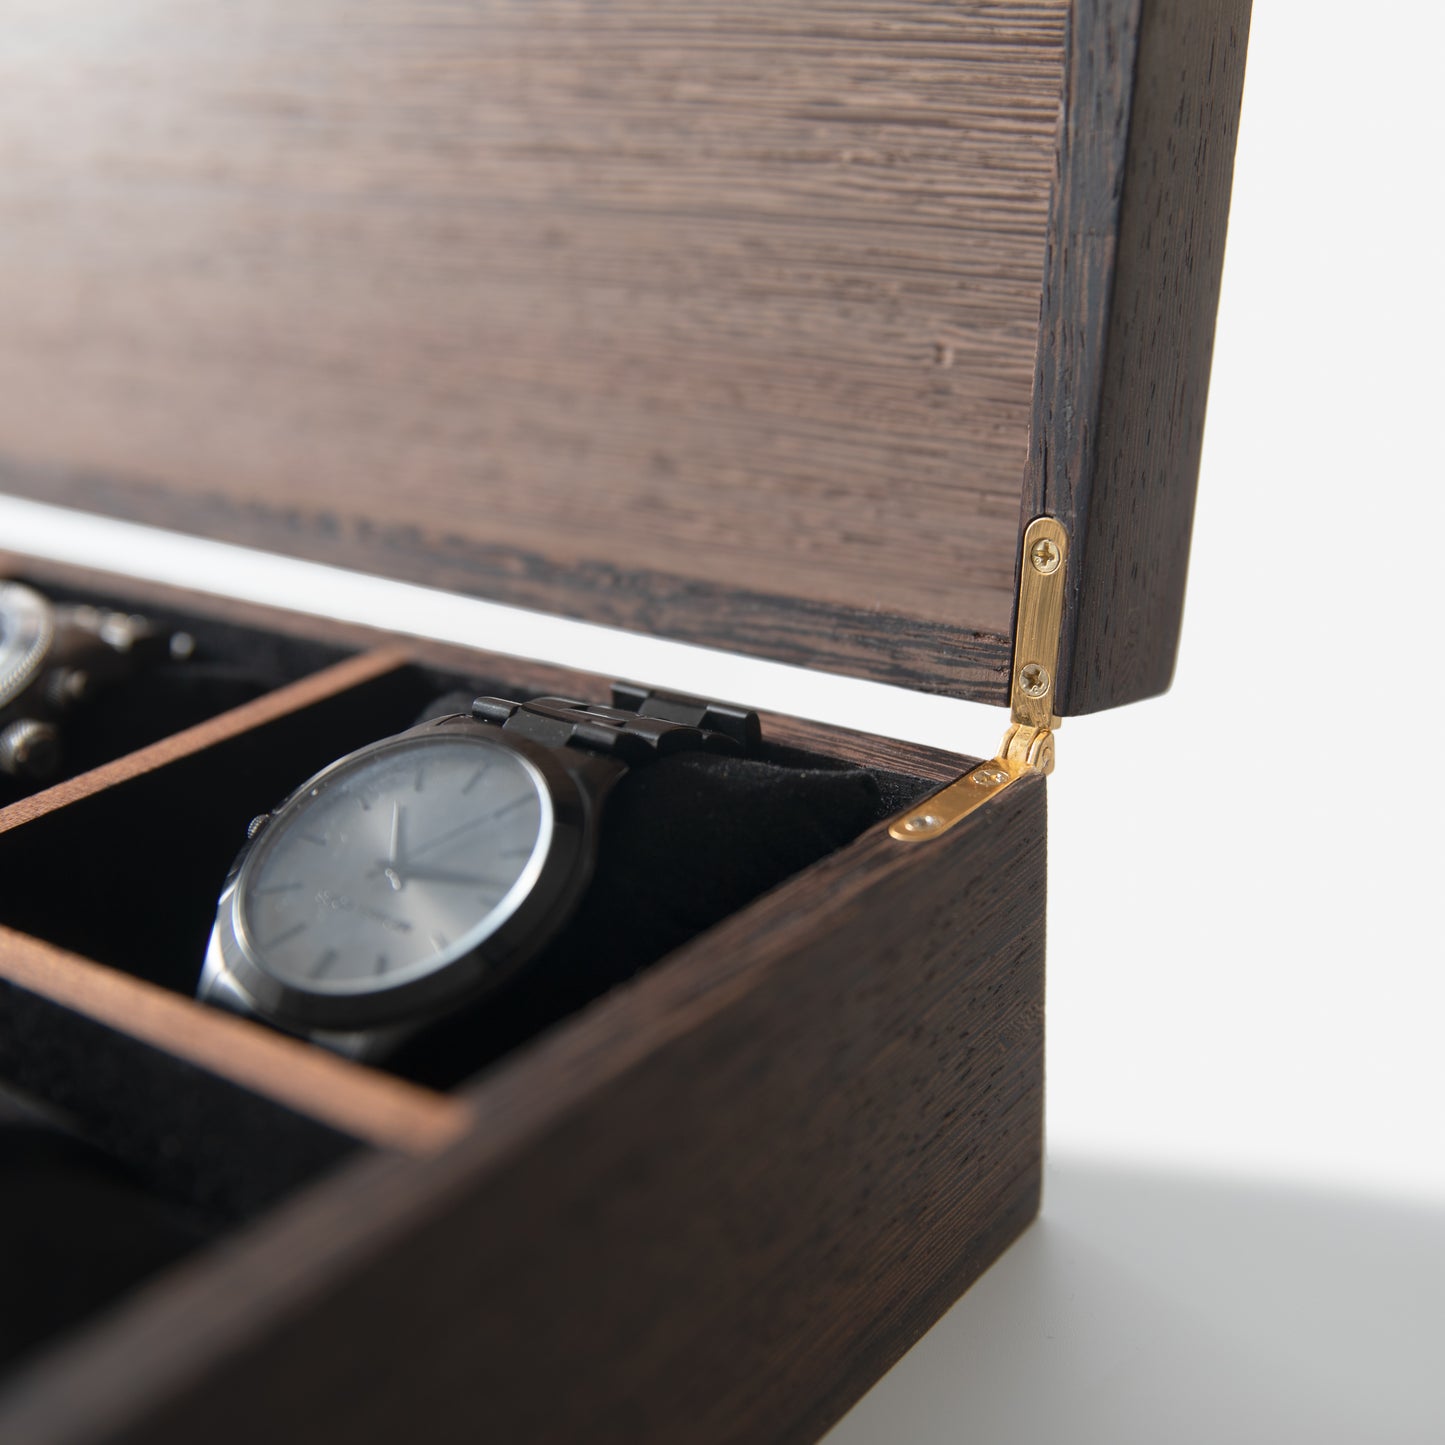 Watch Box - Wenge Hardwood - 8 Watch Compartments